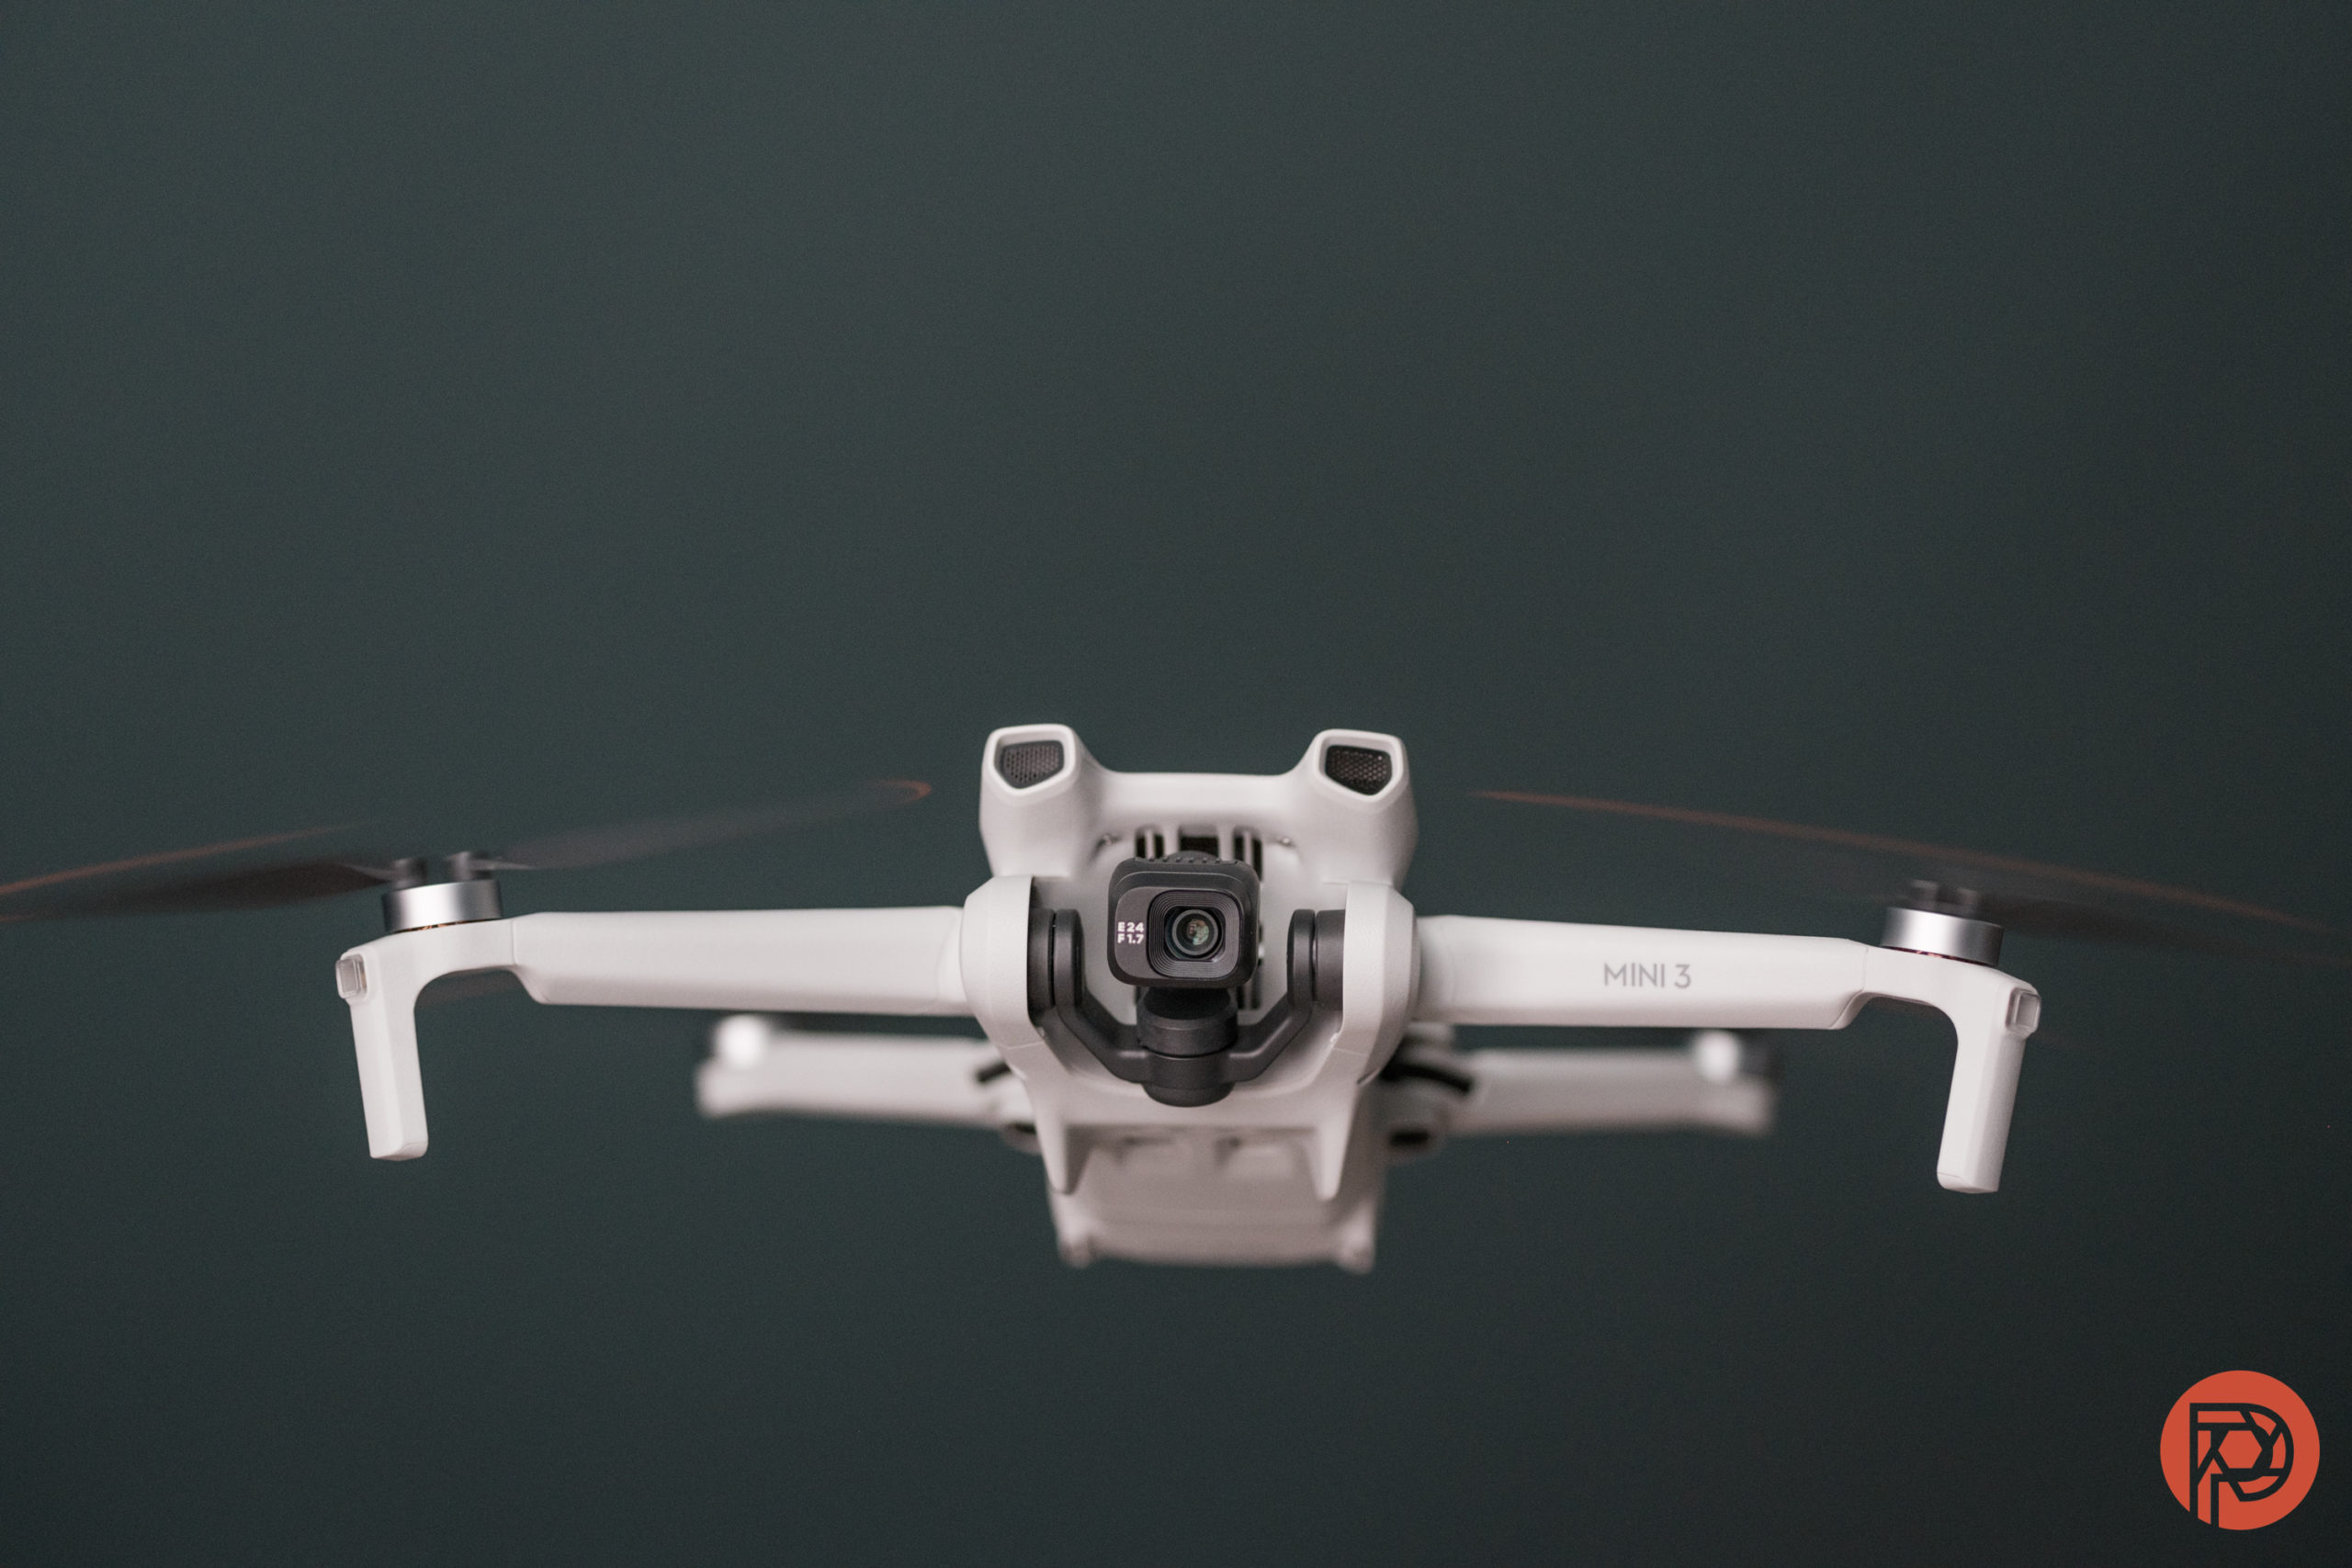 Flying your DJI drone in winter weather? Follow these tips